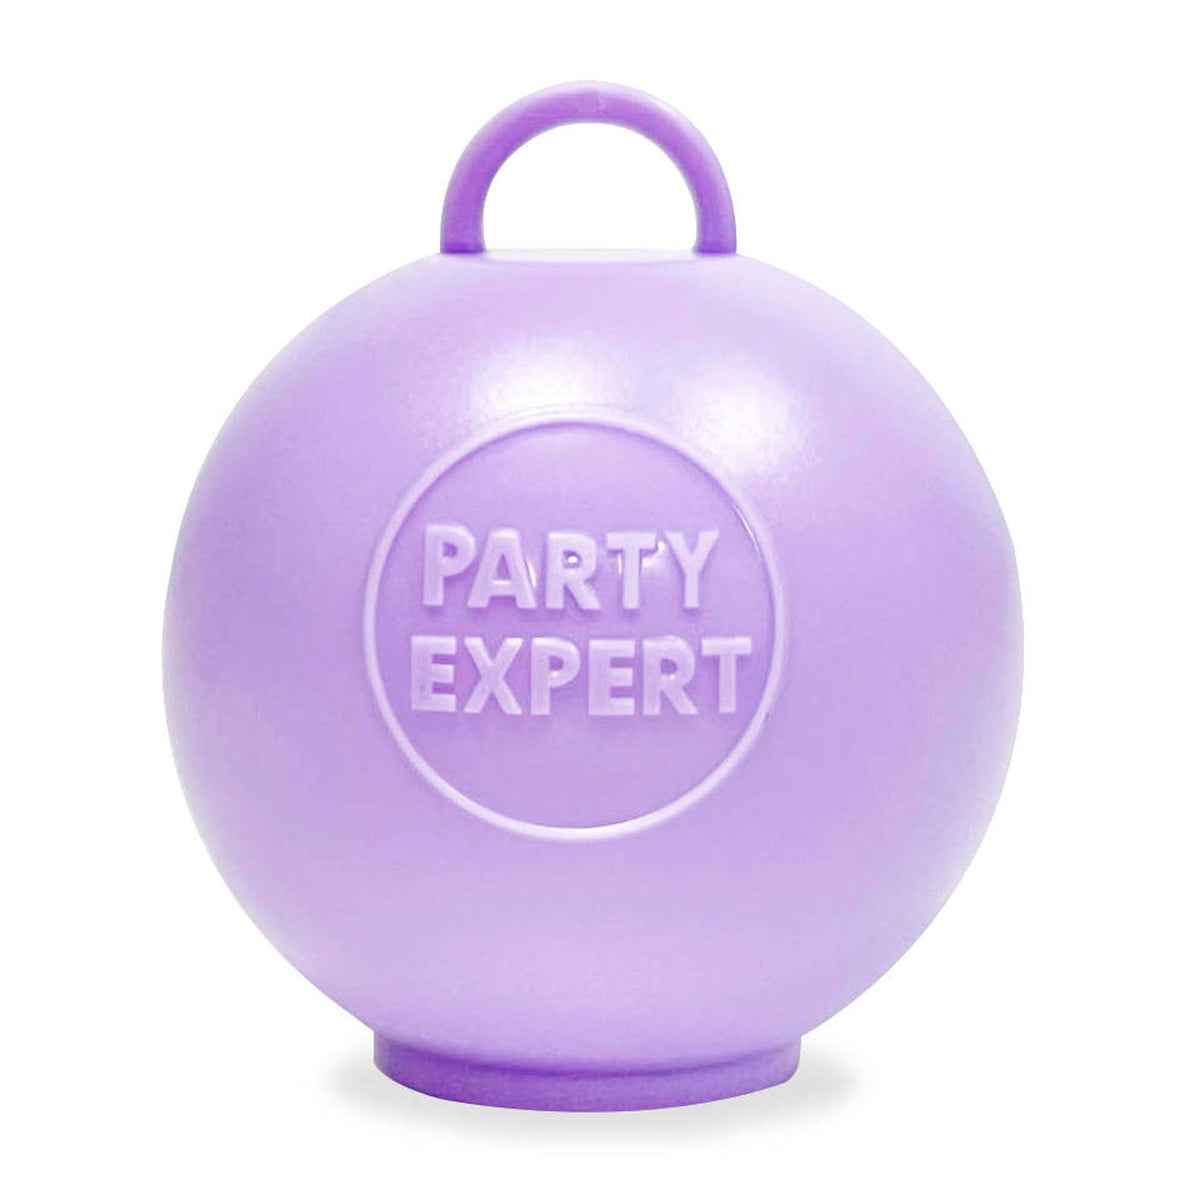 Dongguan Caipai Plastic Hardware Balloons Lavender Purple Bubble Balloon Weight, 1 Count 810077659588